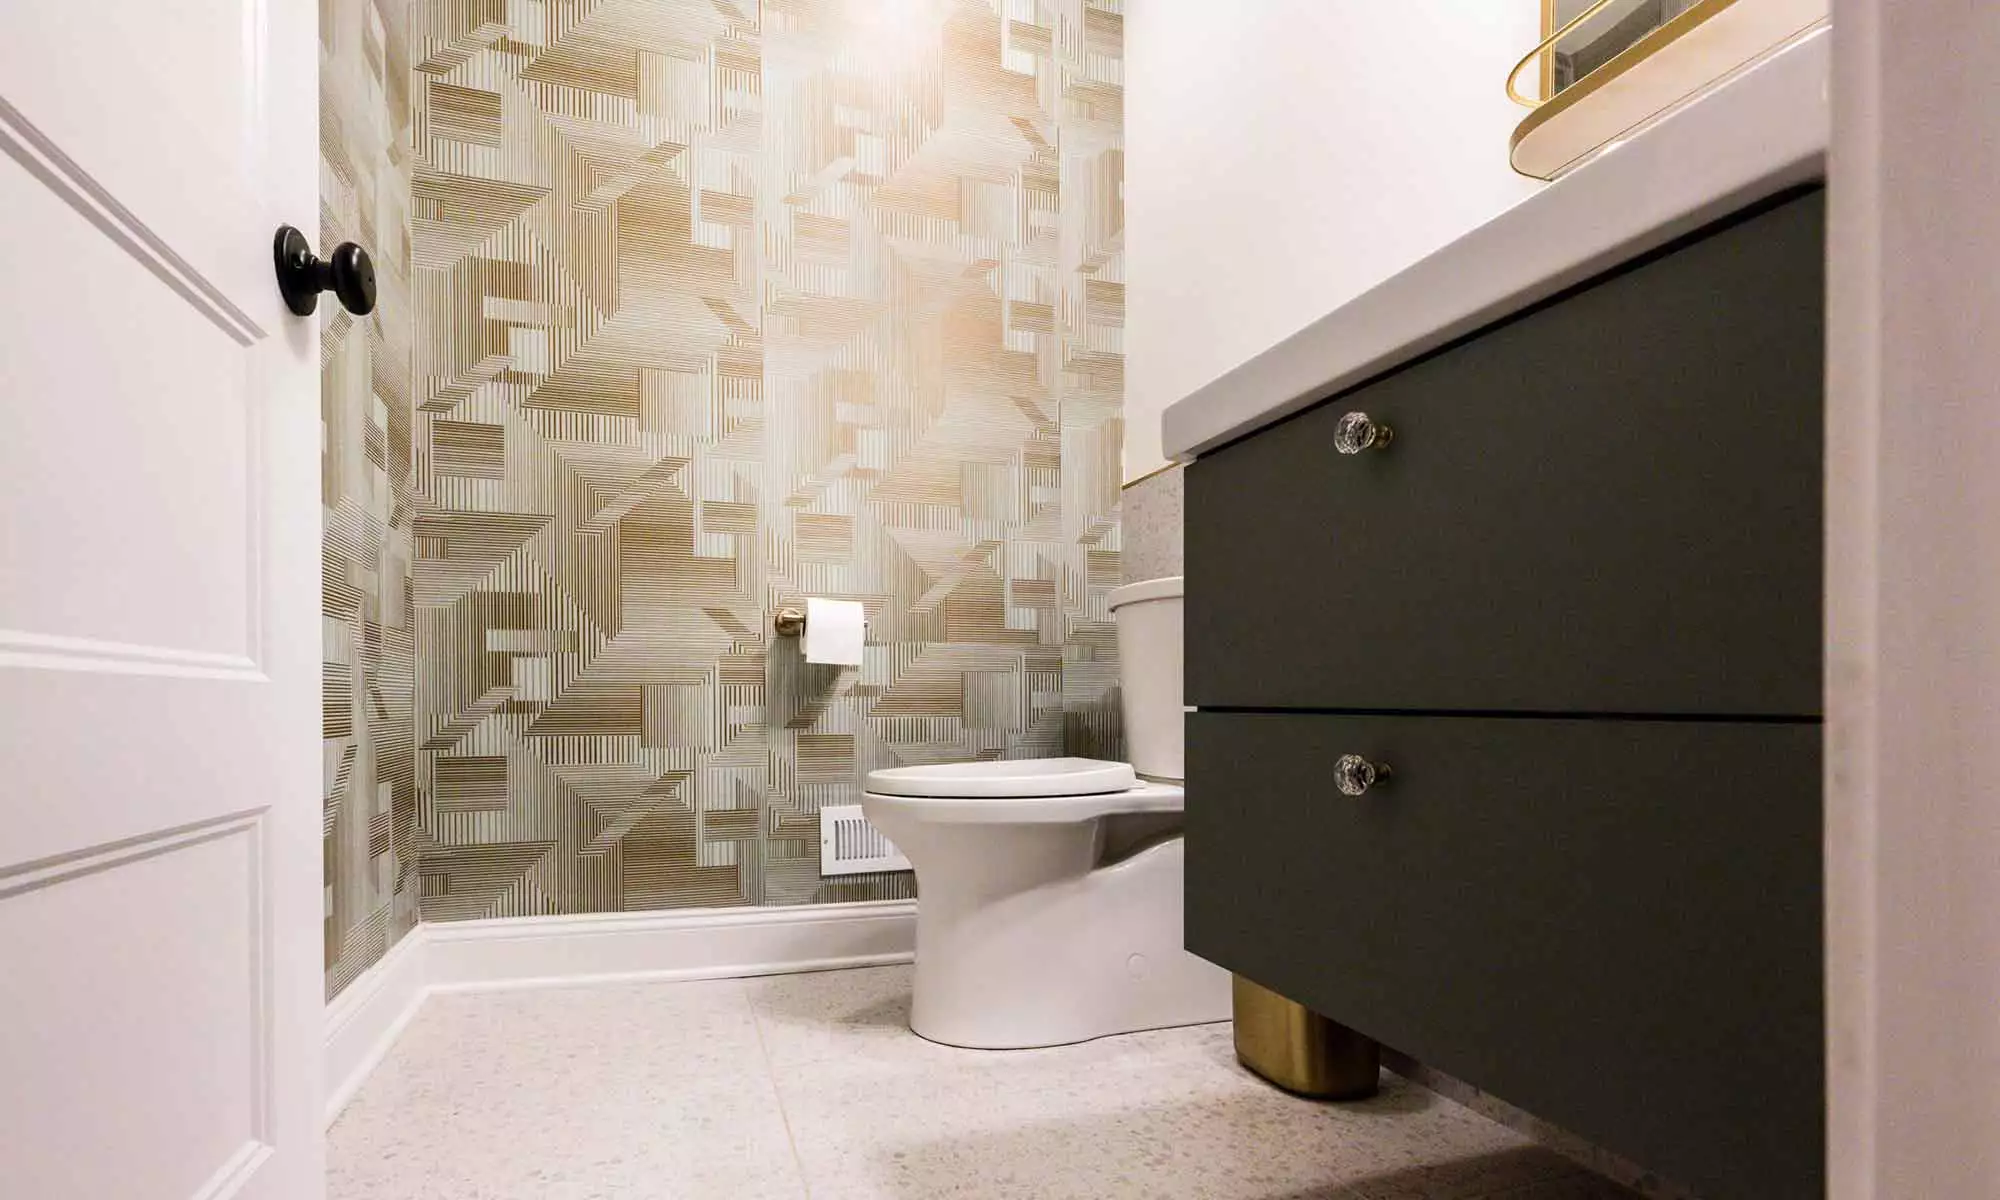 Luxury powder room remodel in Indian Head Park with textured geometric wallpaper and terrazzo flooring